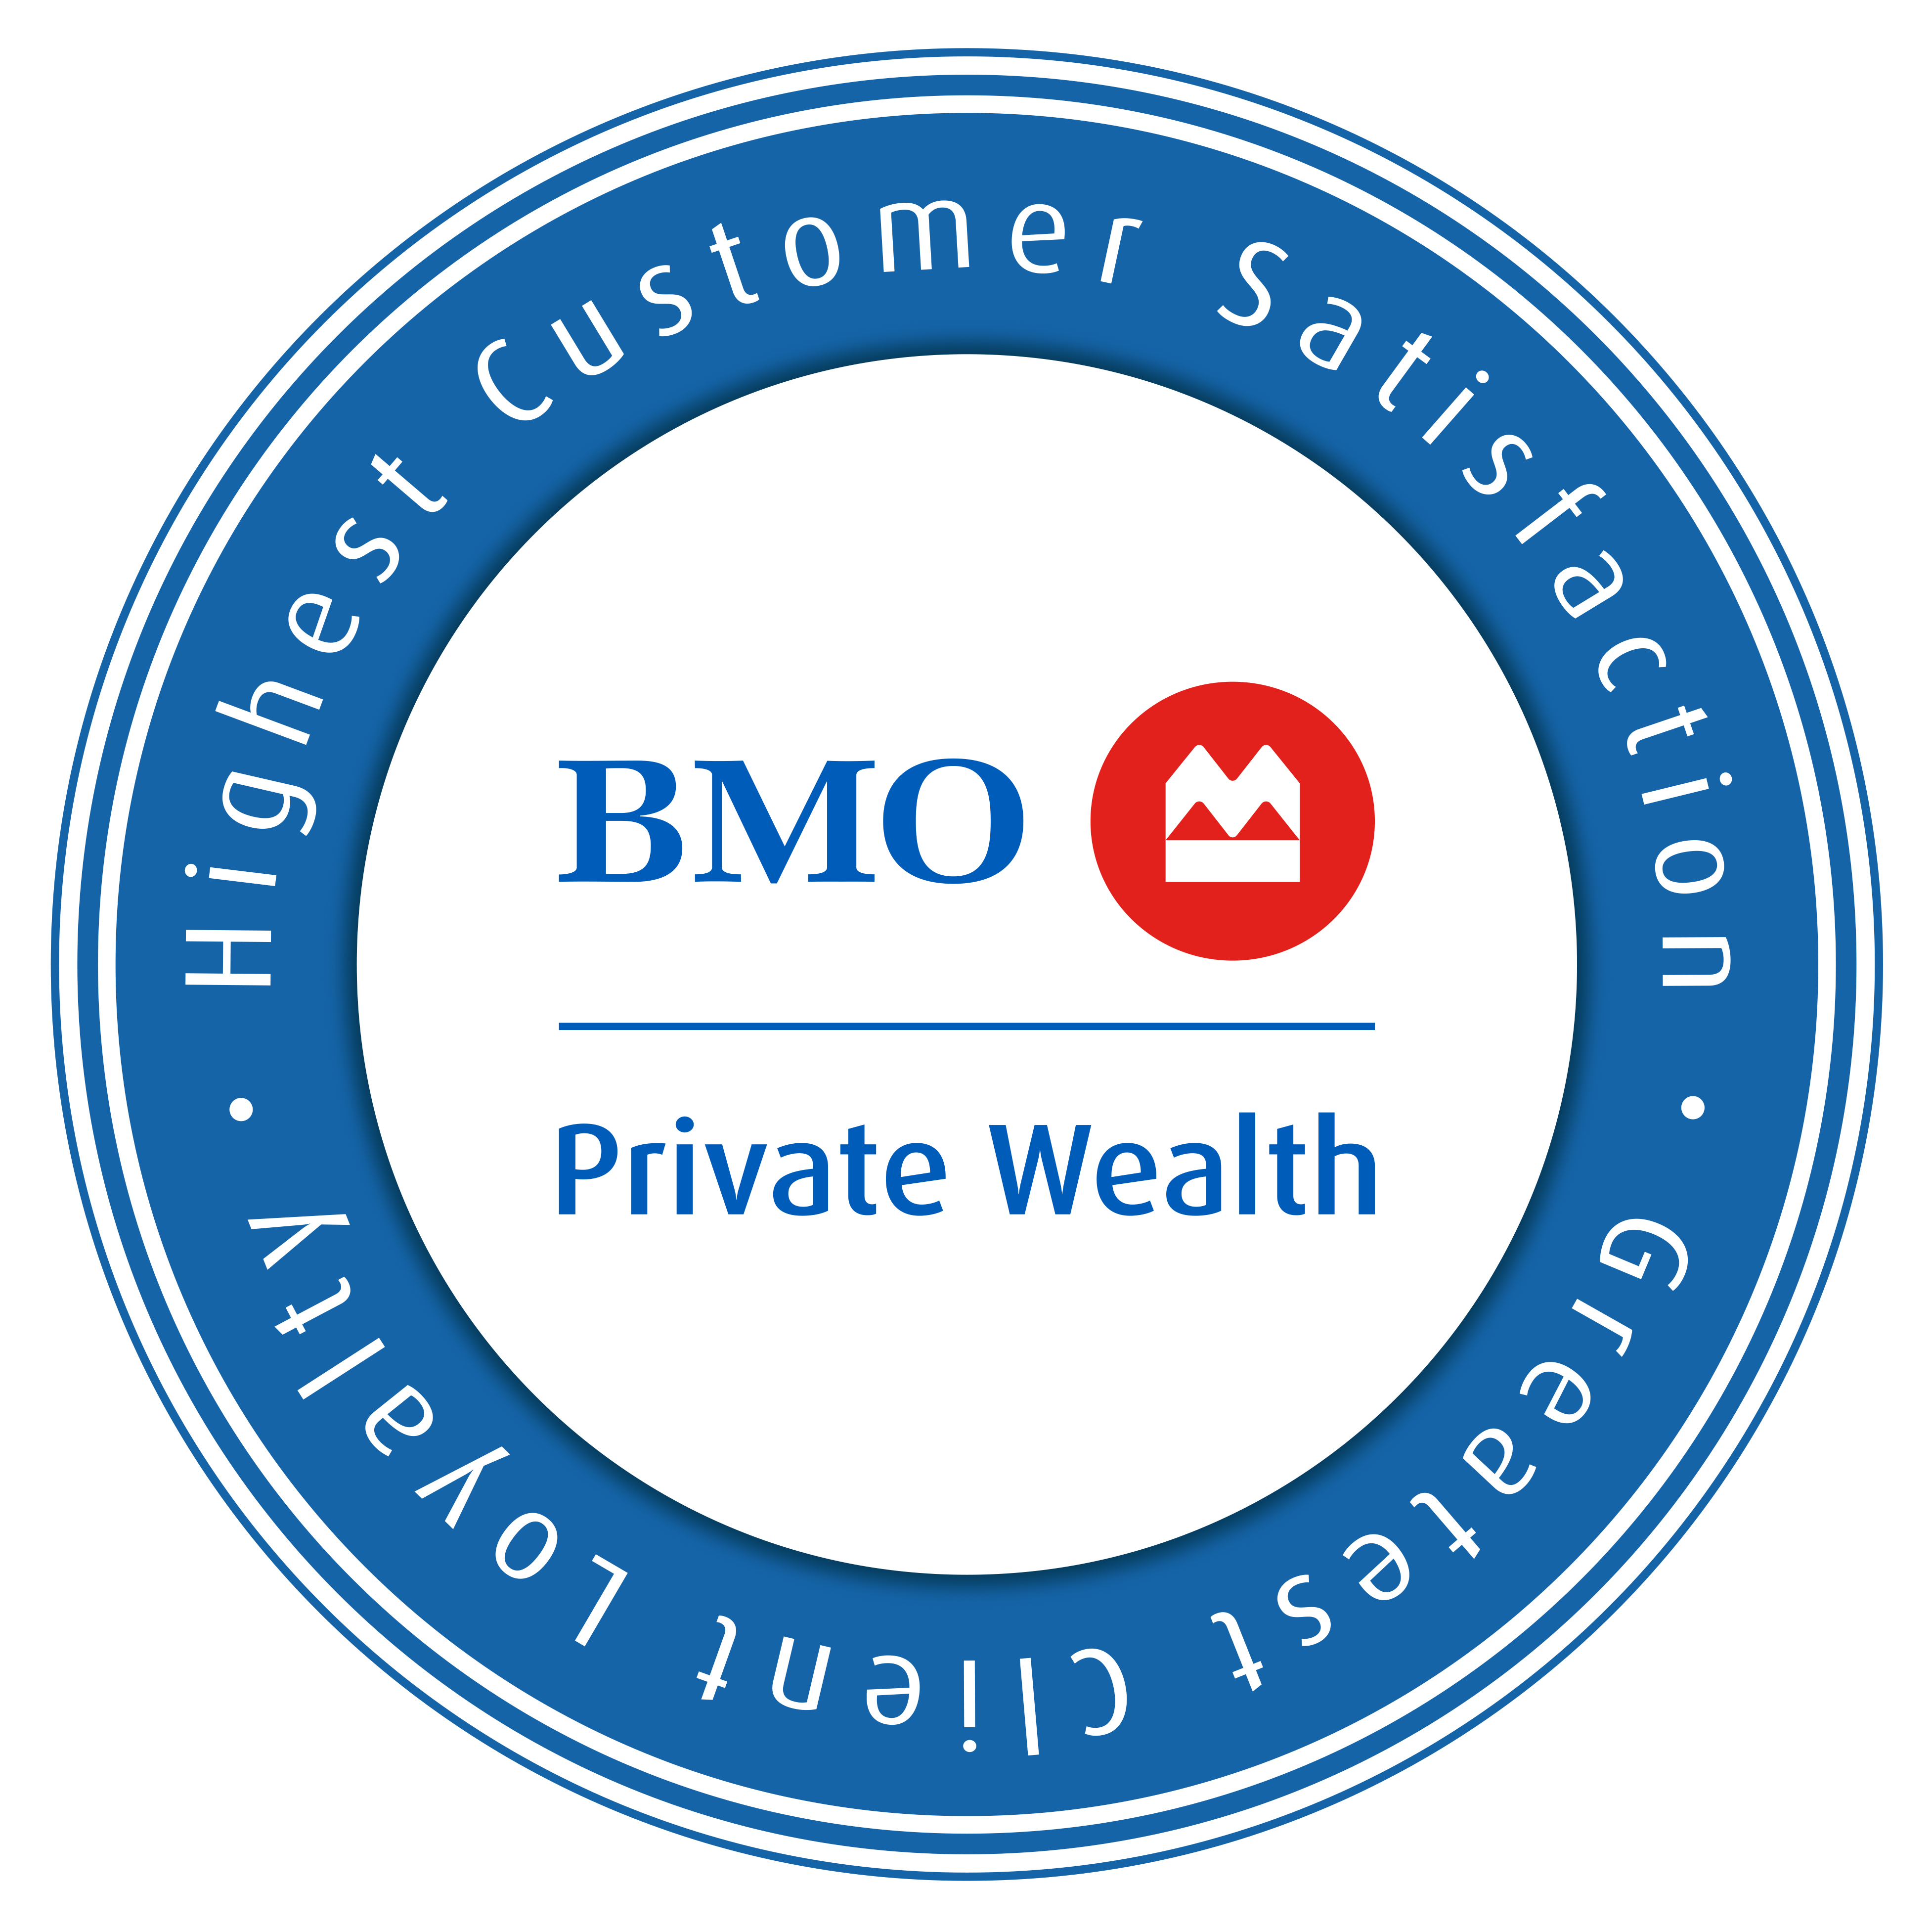 BMO Private Wealth - Highest Customer Satisfaction - Greatest Client Loyalty